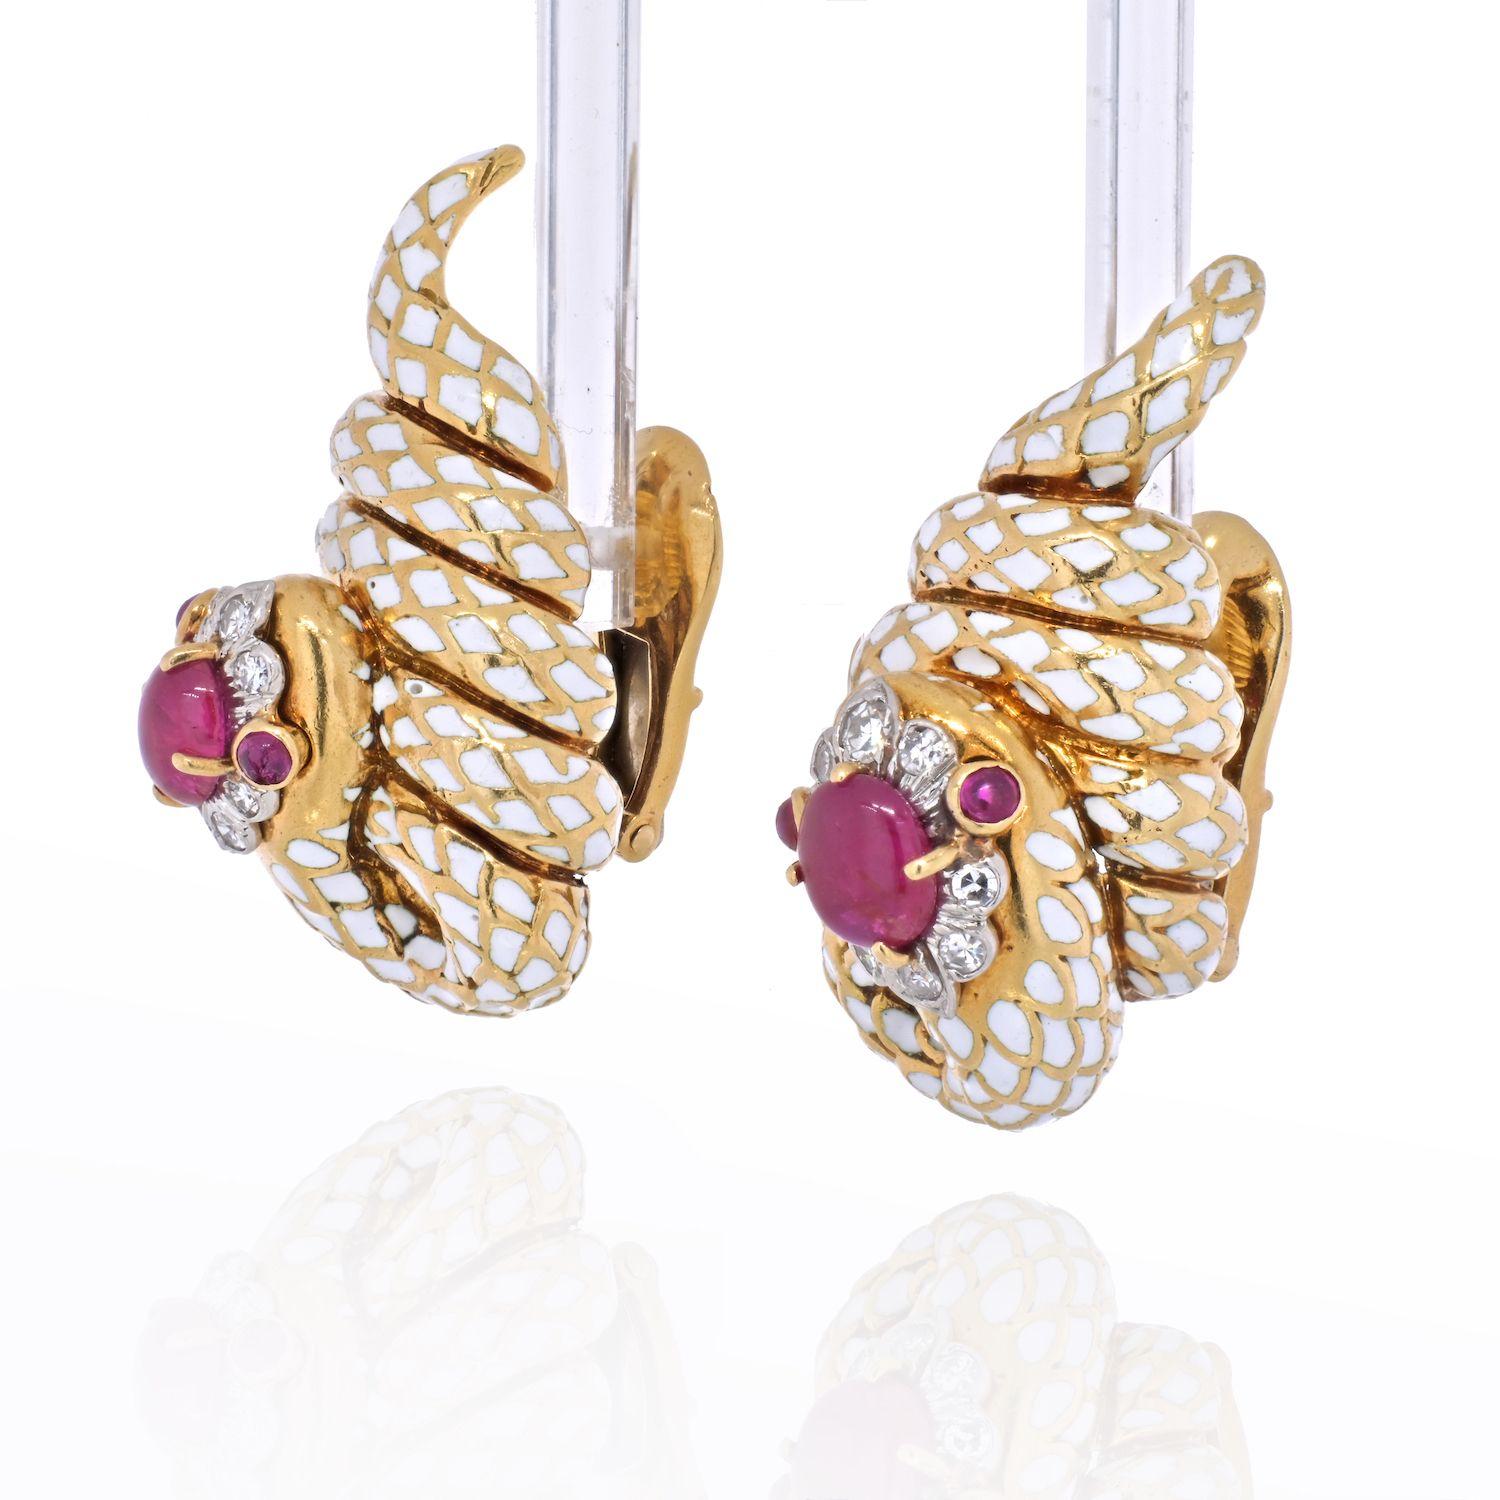 Coiled snake earrings by David Webb. Crafted in 18k yellow gold and platinum. Cabochon rubies, brilliant-cut diamonds, white enamel, 18K gold, and platinum. 
Earring length: 34mm
Earring width: 17mm
Clip on closure. 